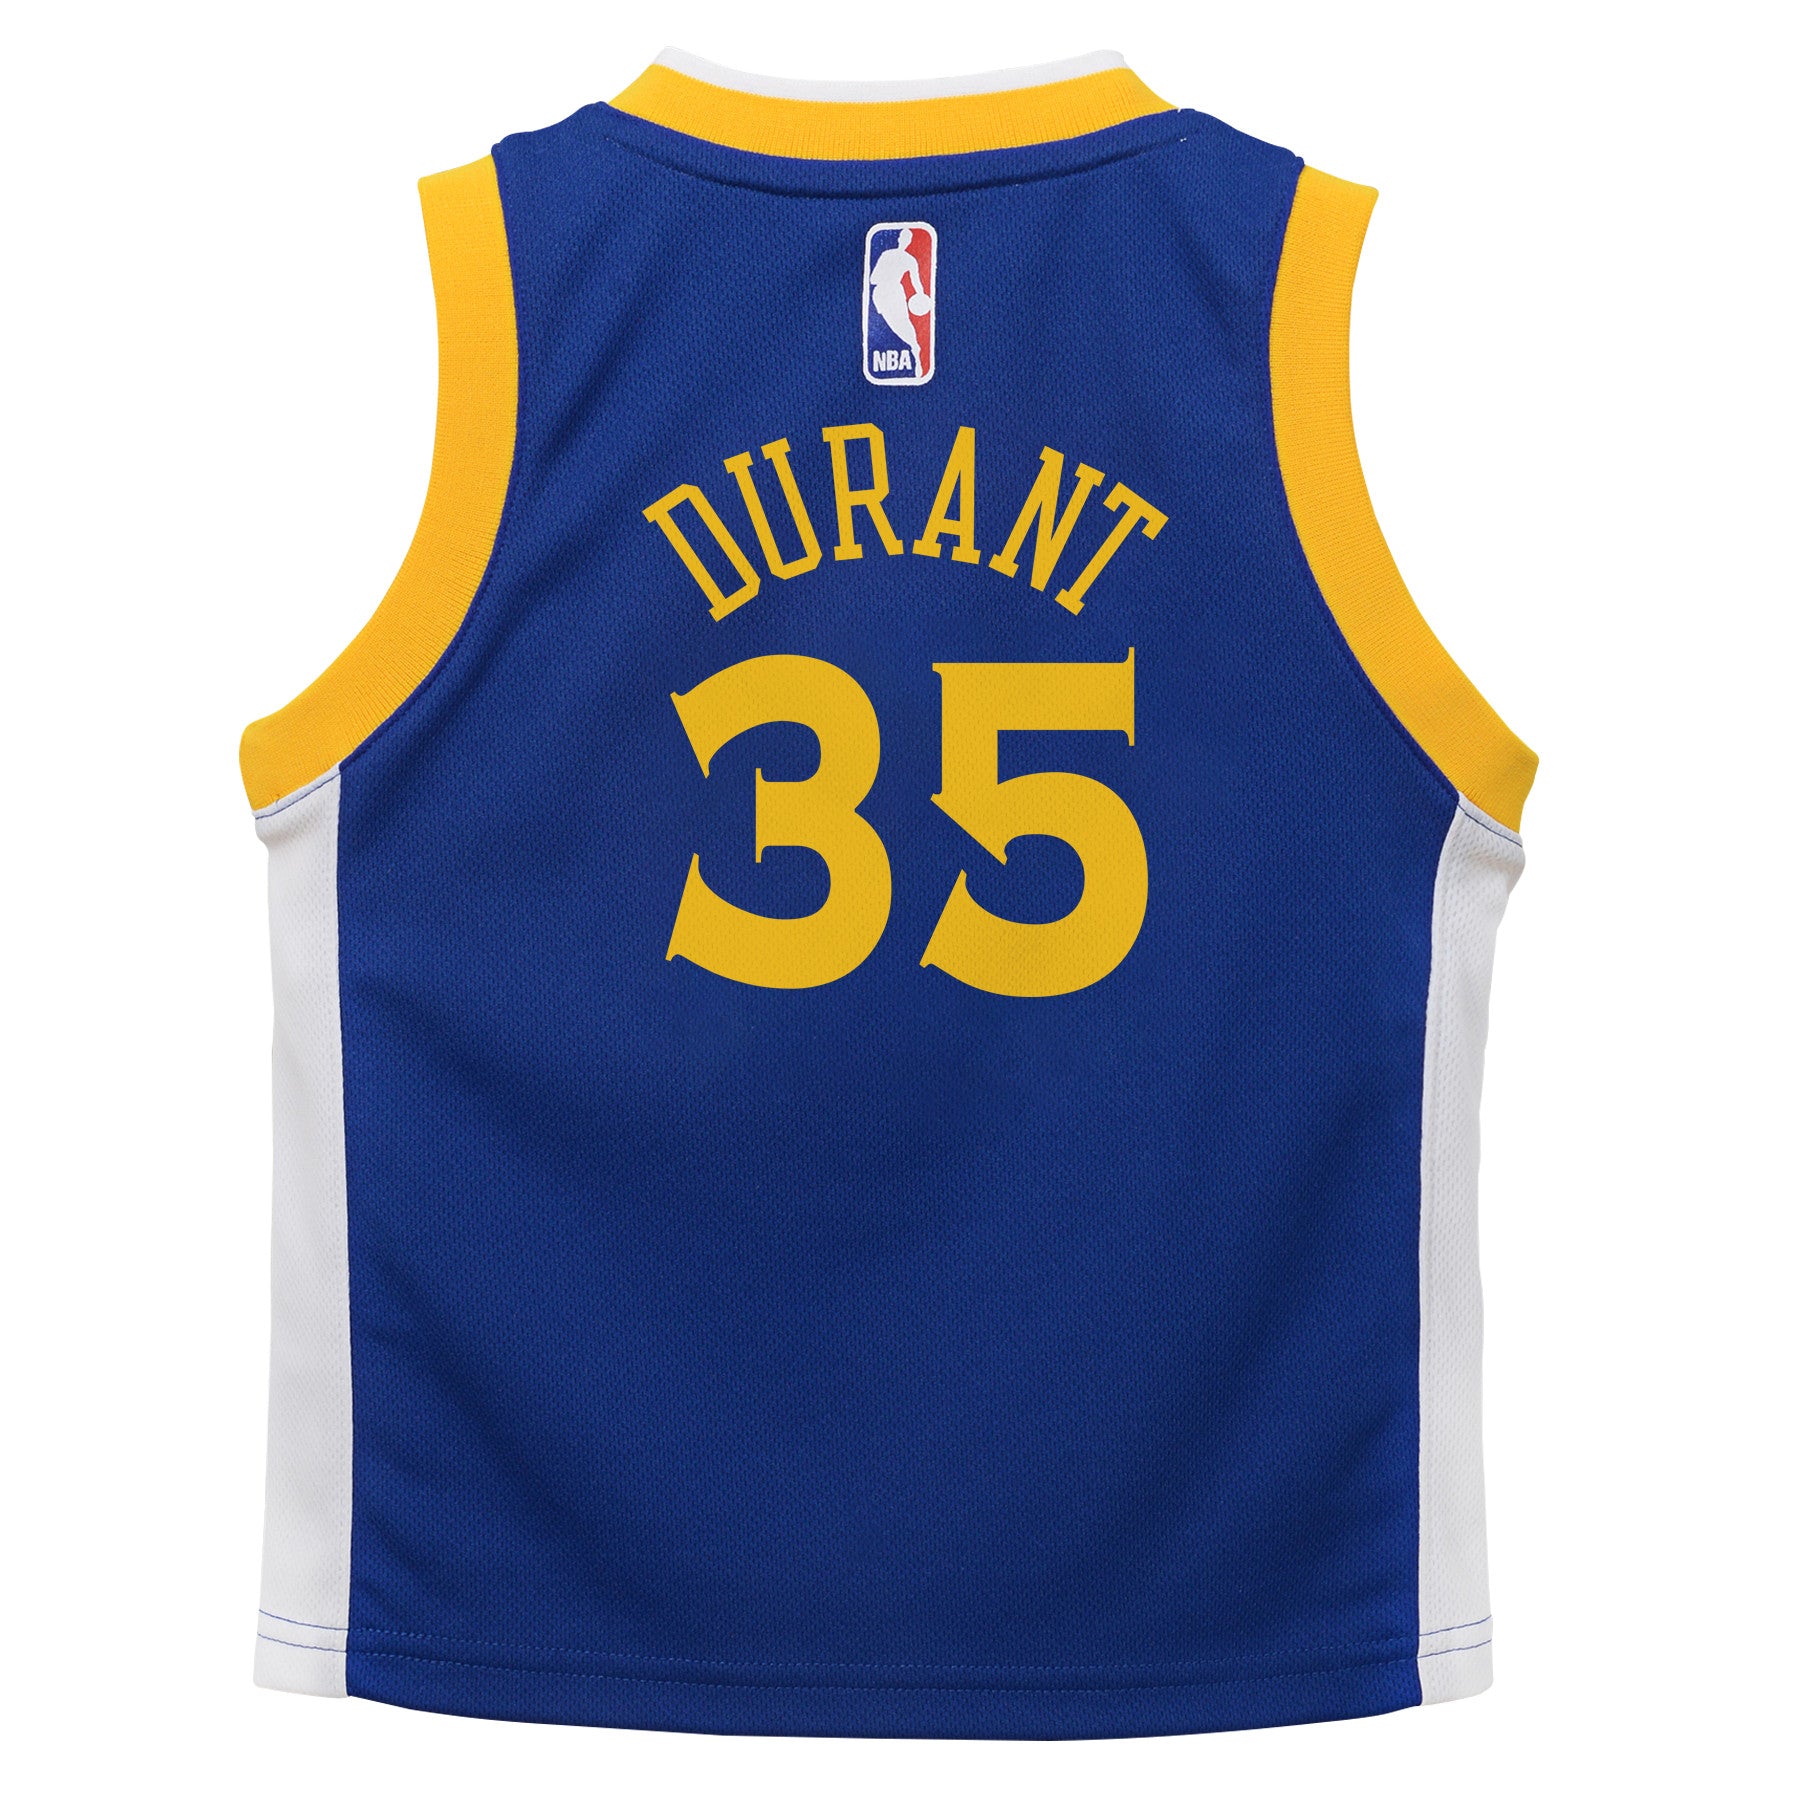 kevin durant youth jersey adidas white replica